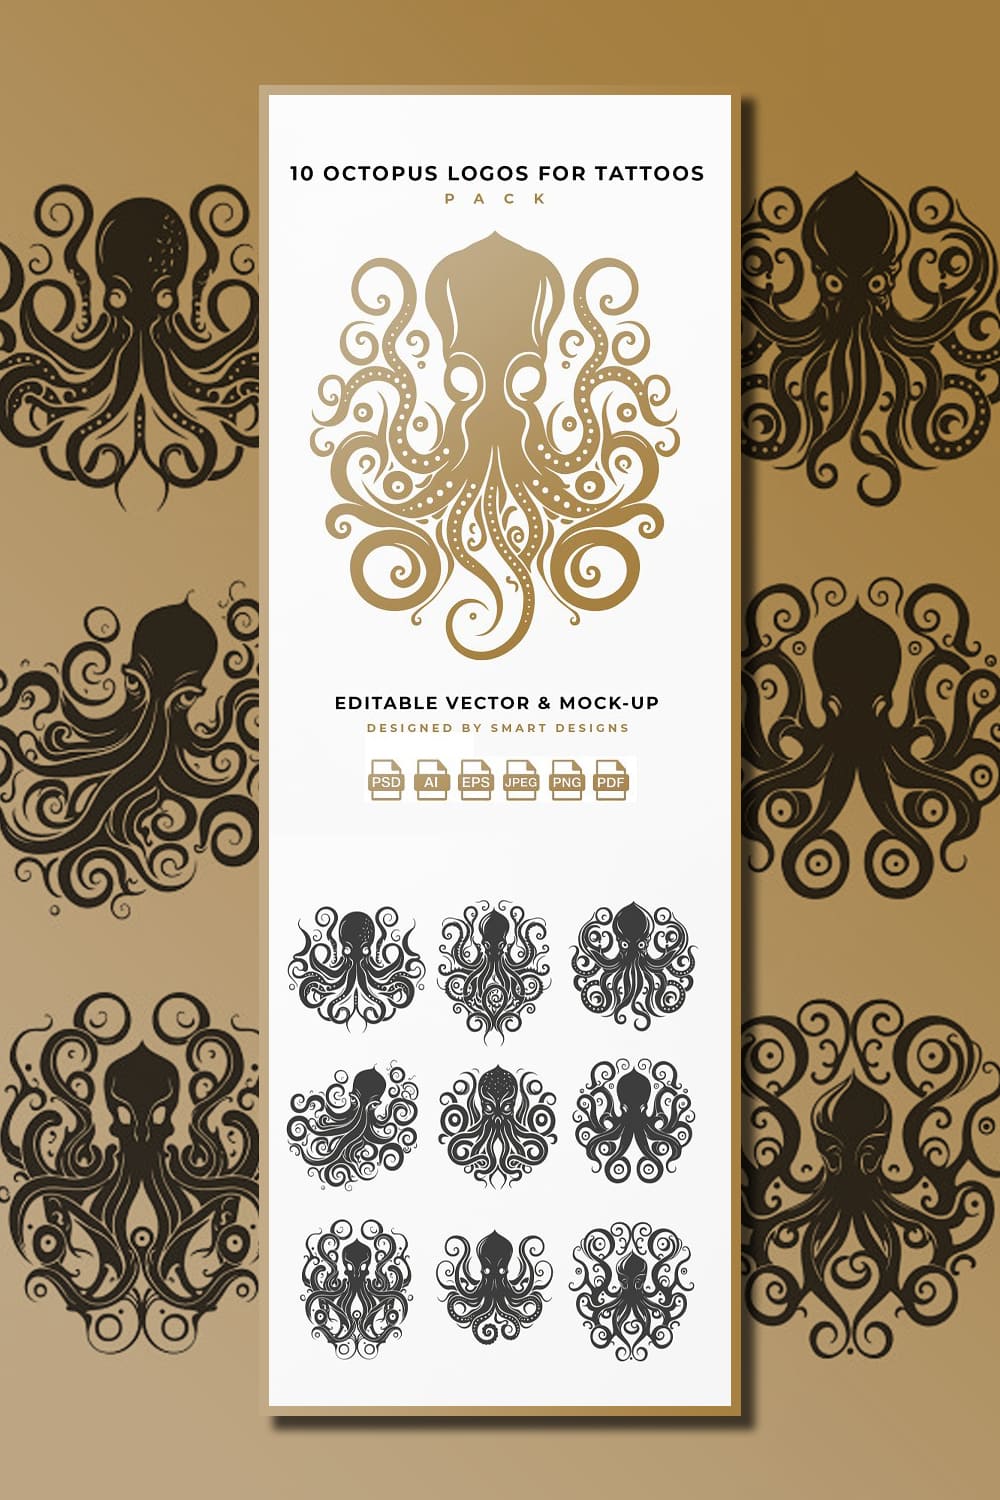 10 Octopus logos with small and large tentacles.